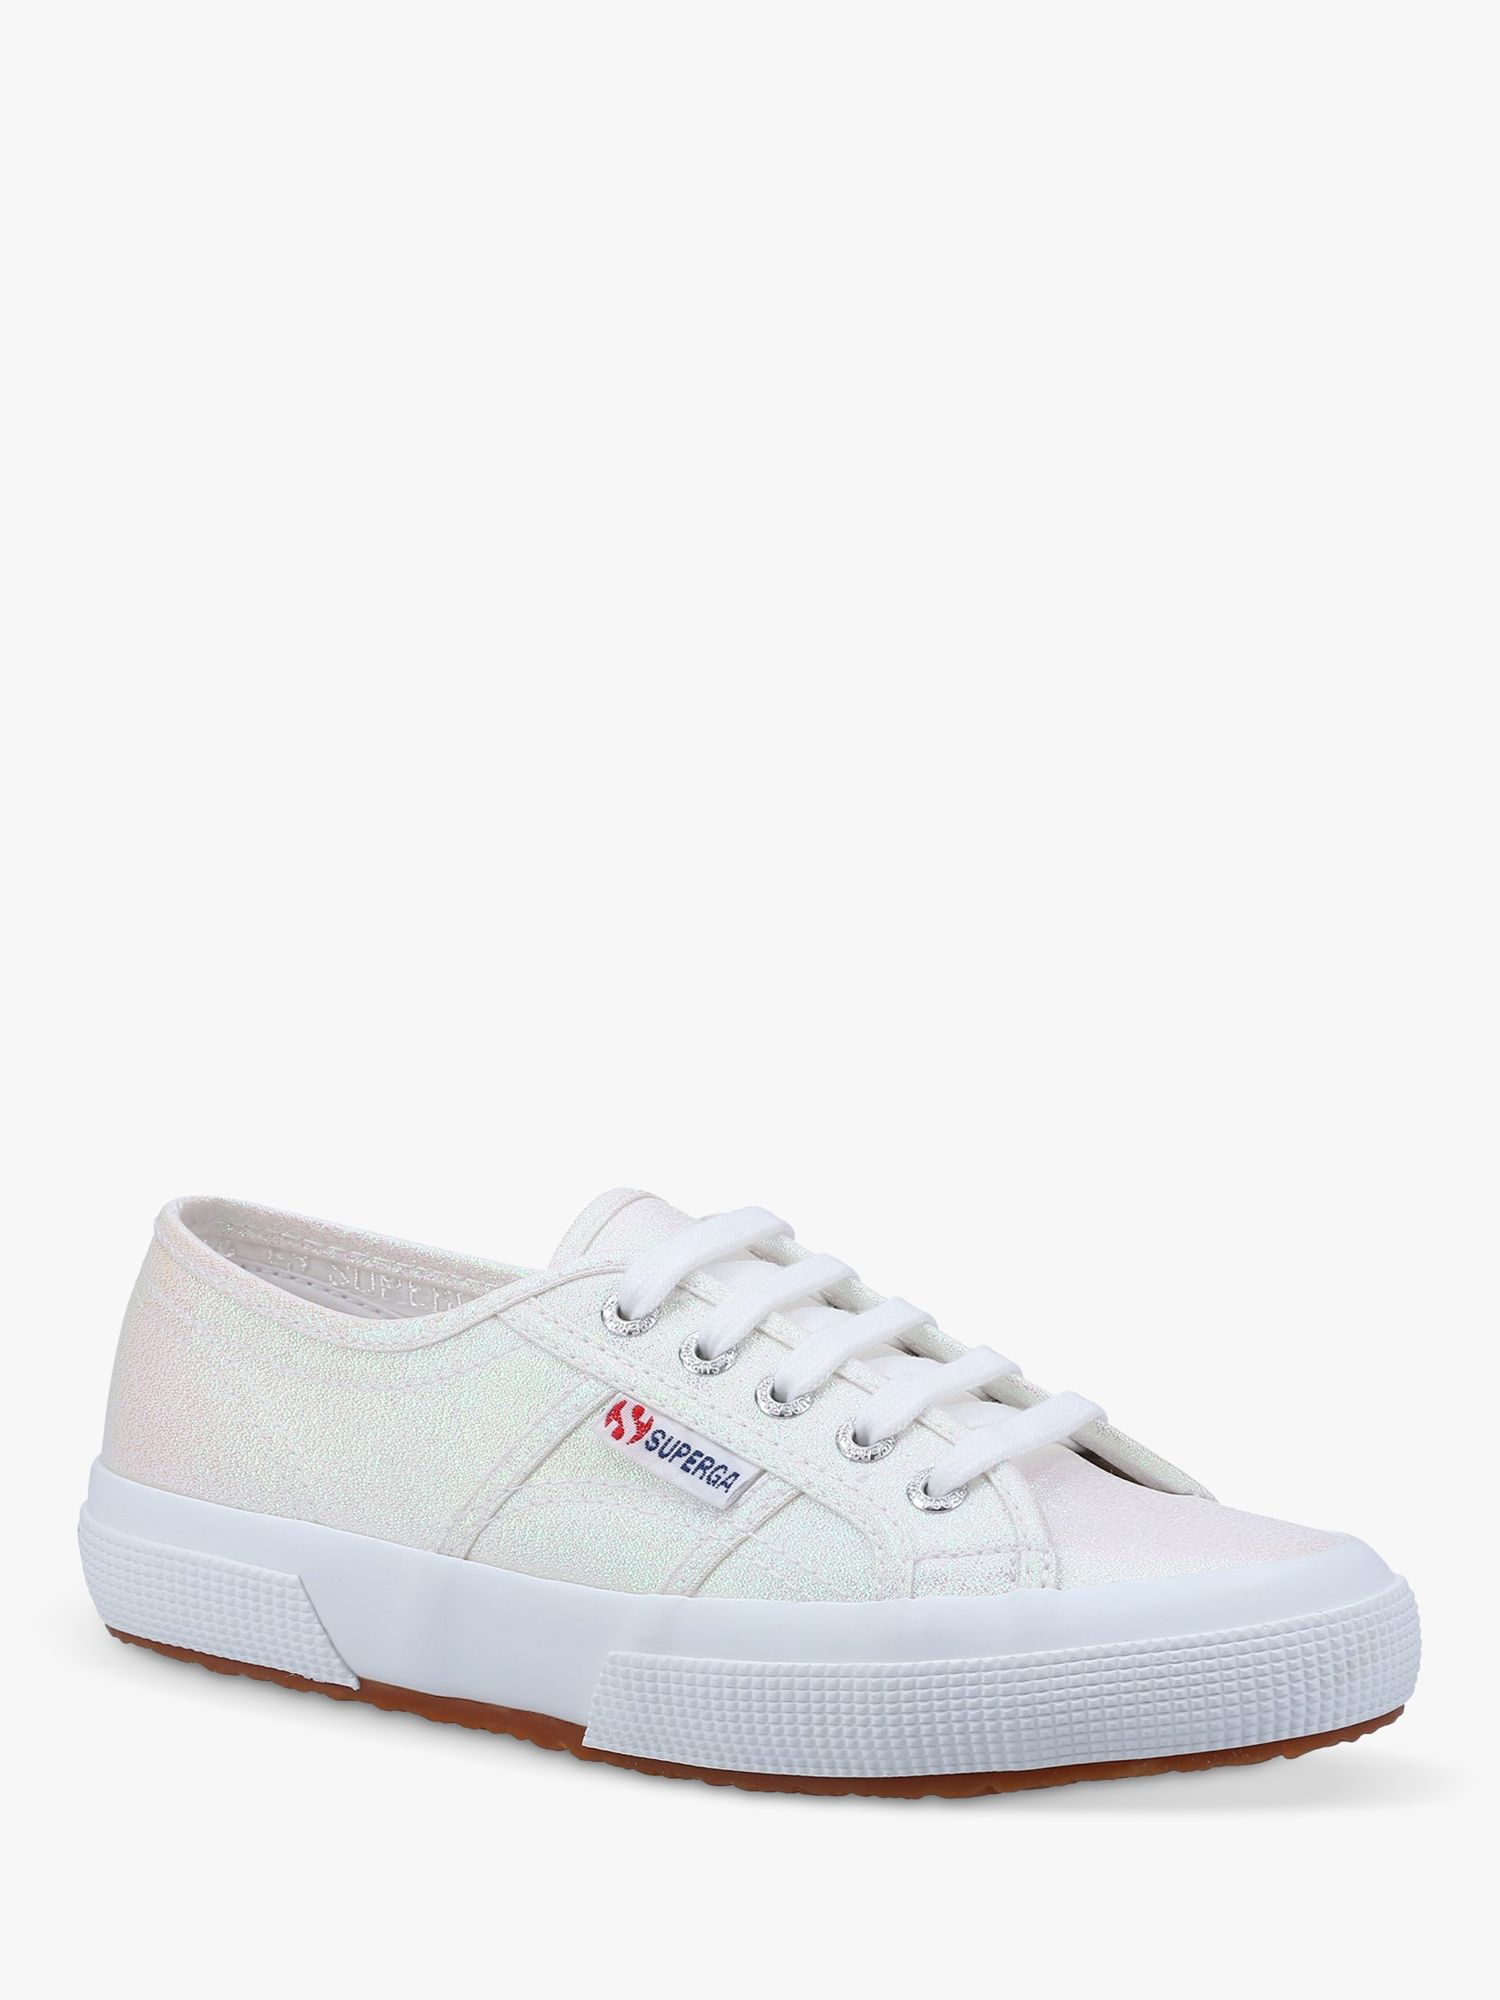 Buy Superga 2750 Lame Trainers, White Online at johnlewis.com